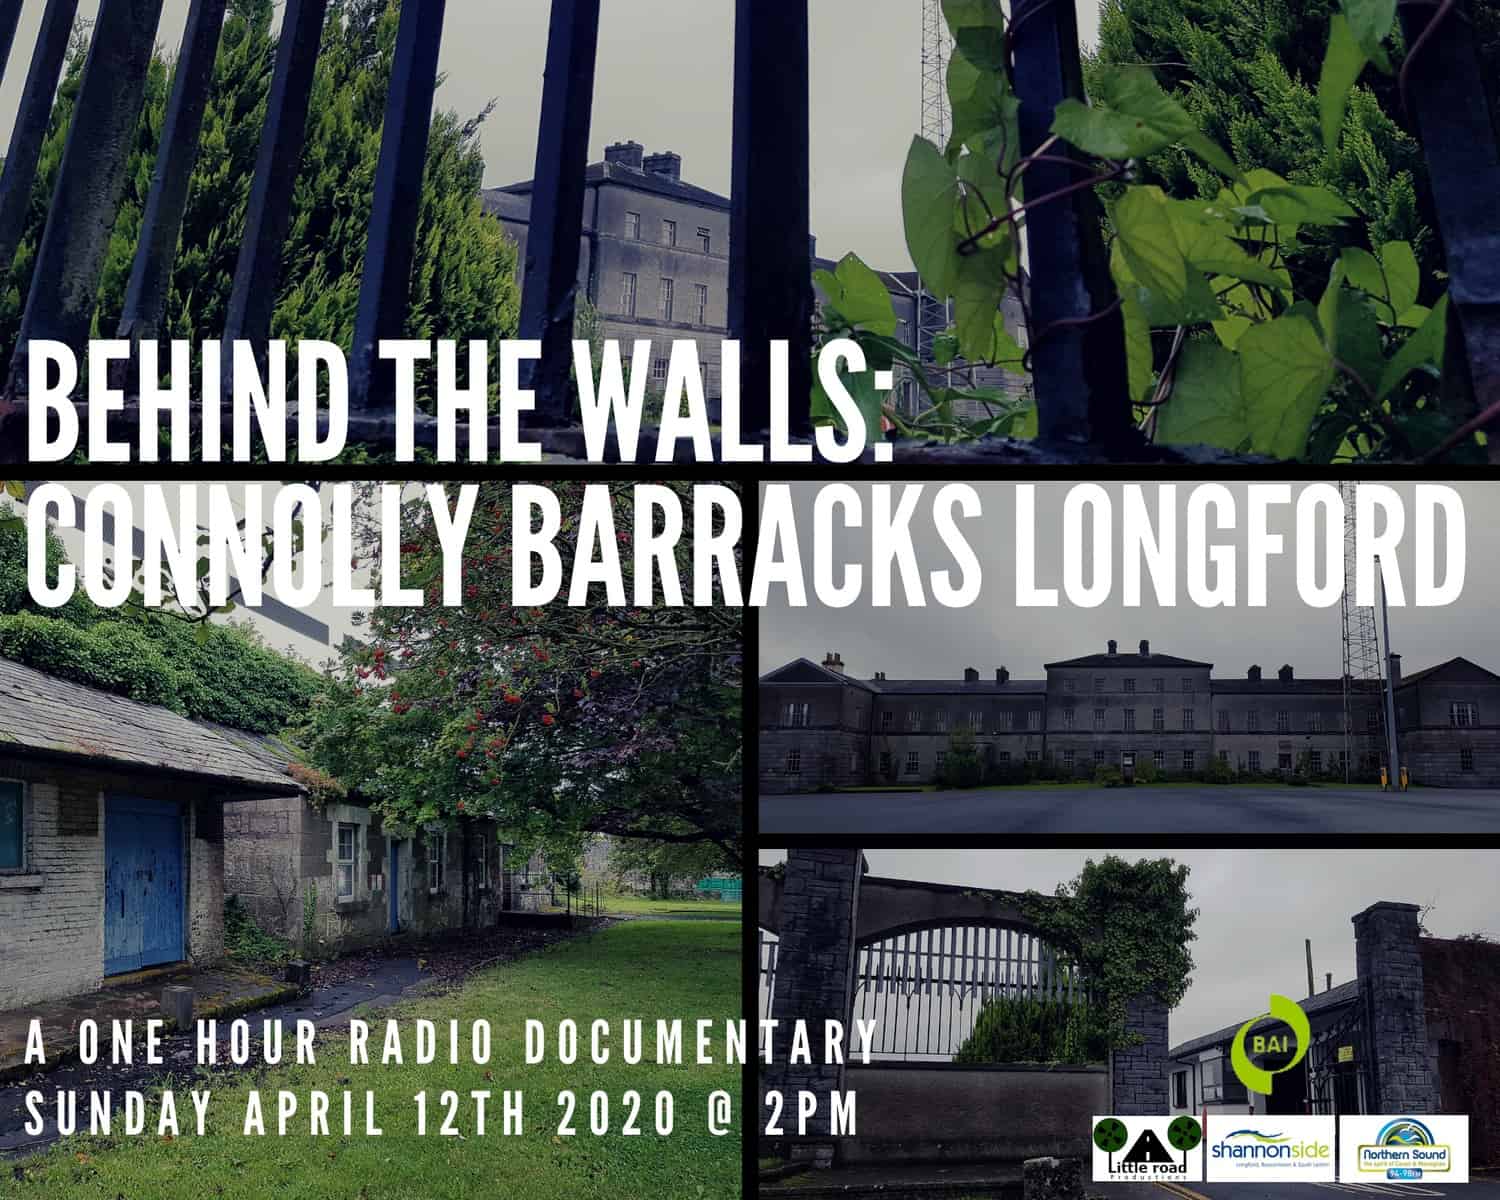 Behind the Walls: Connolly Barracks Longford